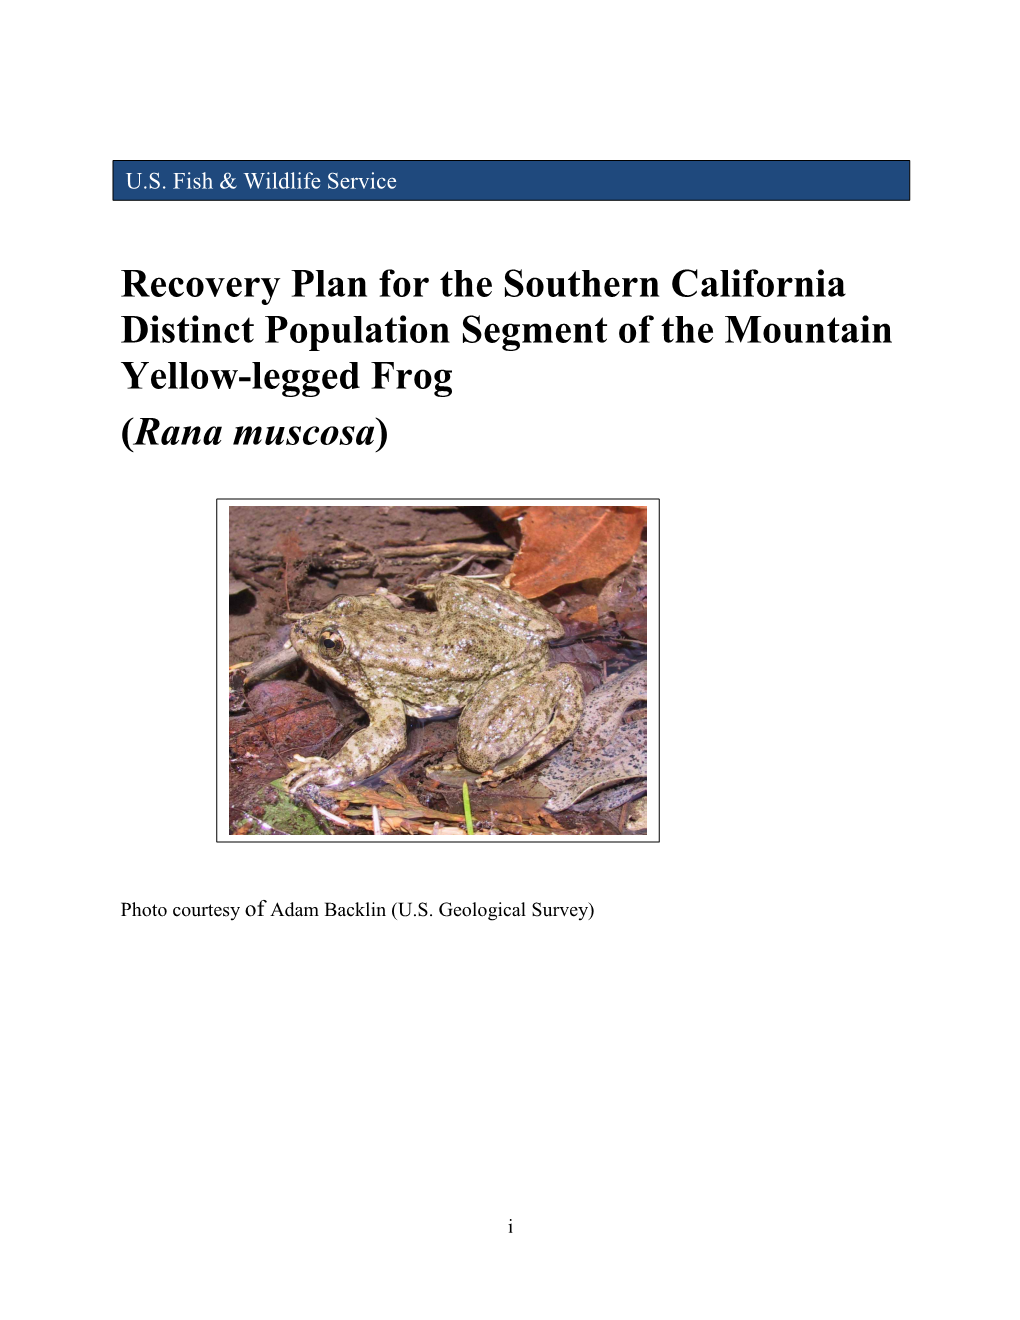 Recovery Plan for the Southern California Distinct Population Segment of the Mountain Yellow-Legged Frog (Rana Muscosa)